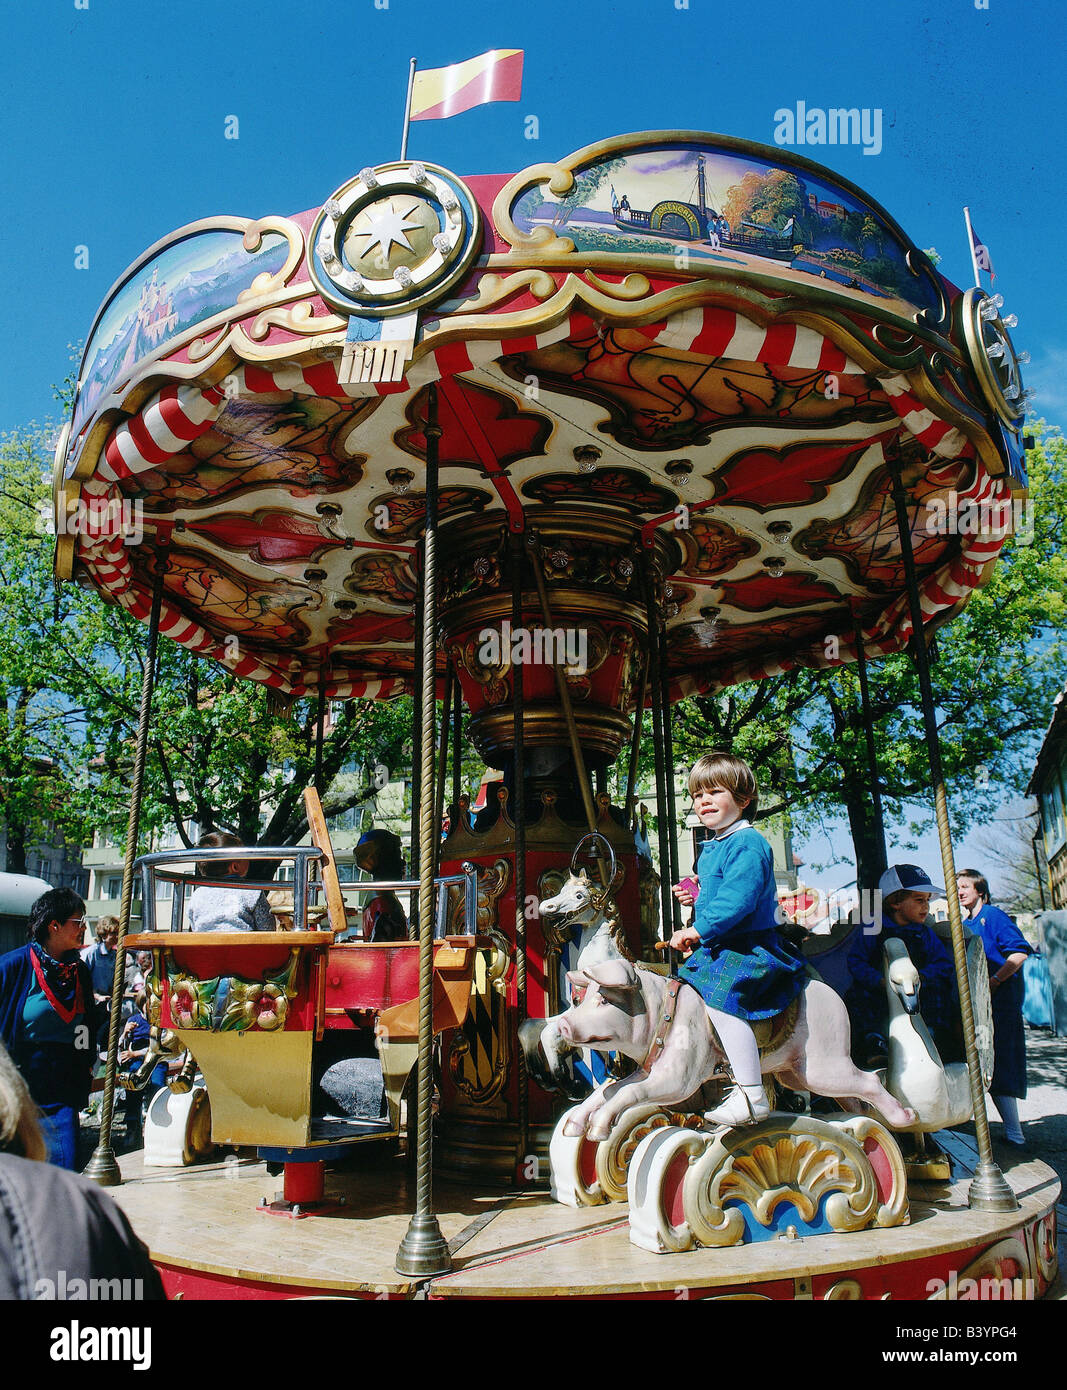 geography / travel, Germany, Bavaria, Munich, markets, Auer Dult, fair, market, child in whirligig, merry-go-round, carousel, carrousel, roundabout, children, Stock Photo